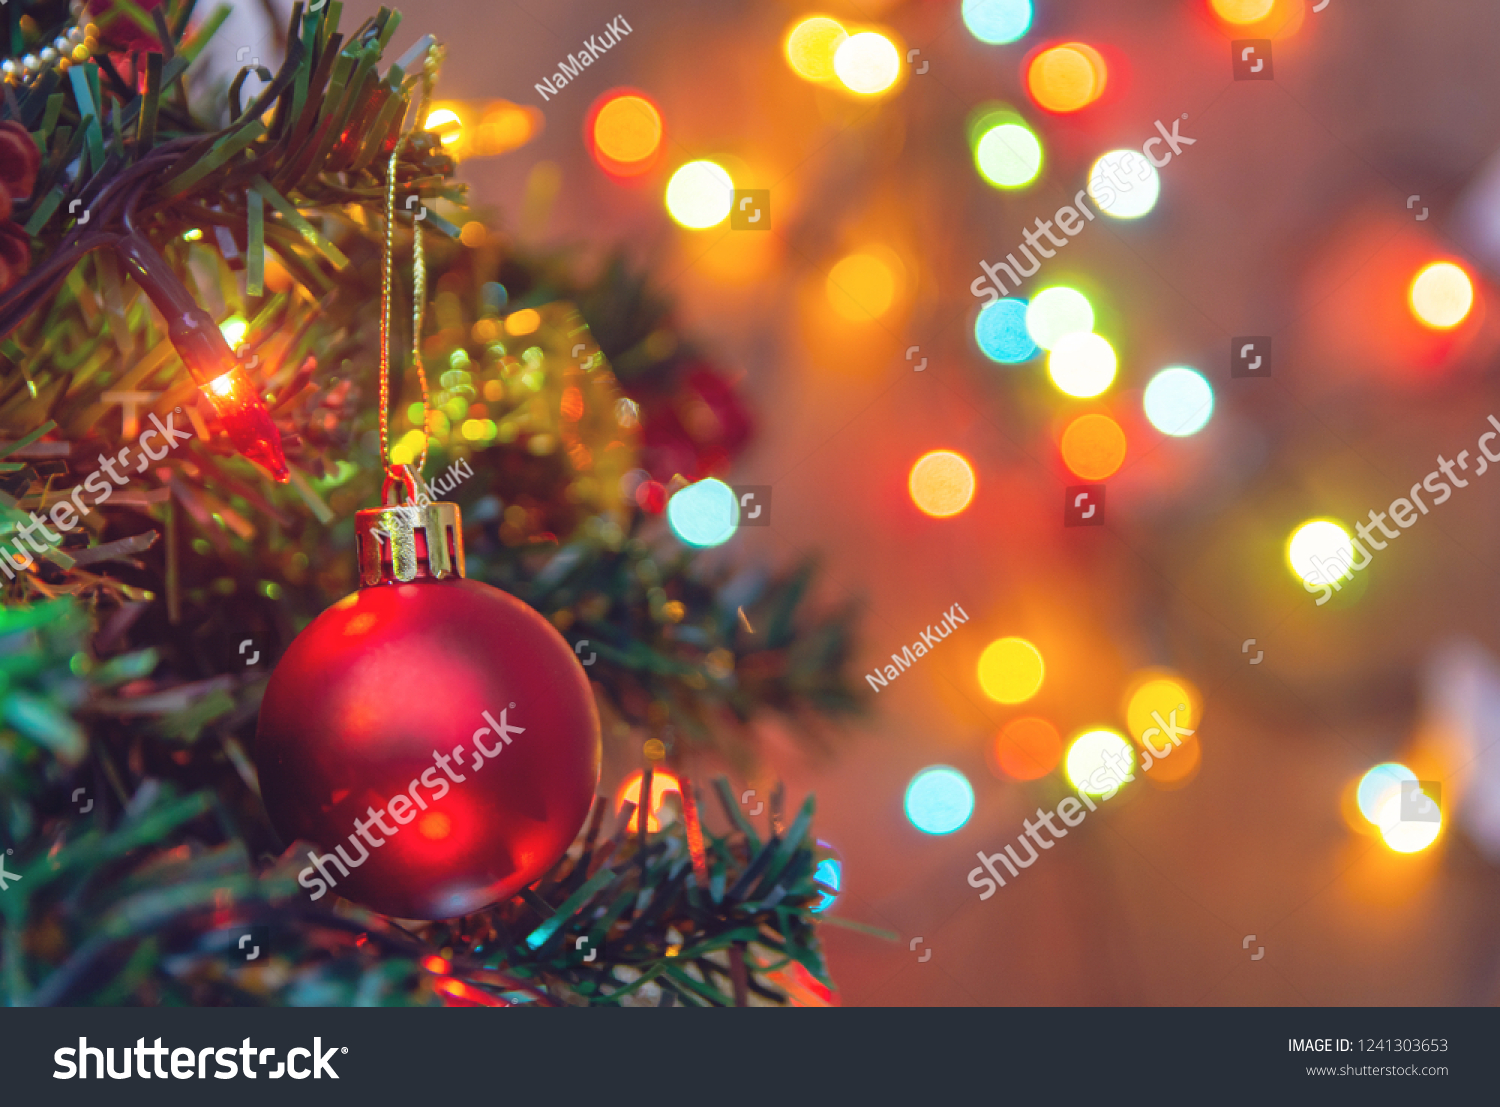 Christmas decoration. Hanging red balls on pine branches christmas tree garland and ornaments over abstract bokeh background with copy space #1241303653